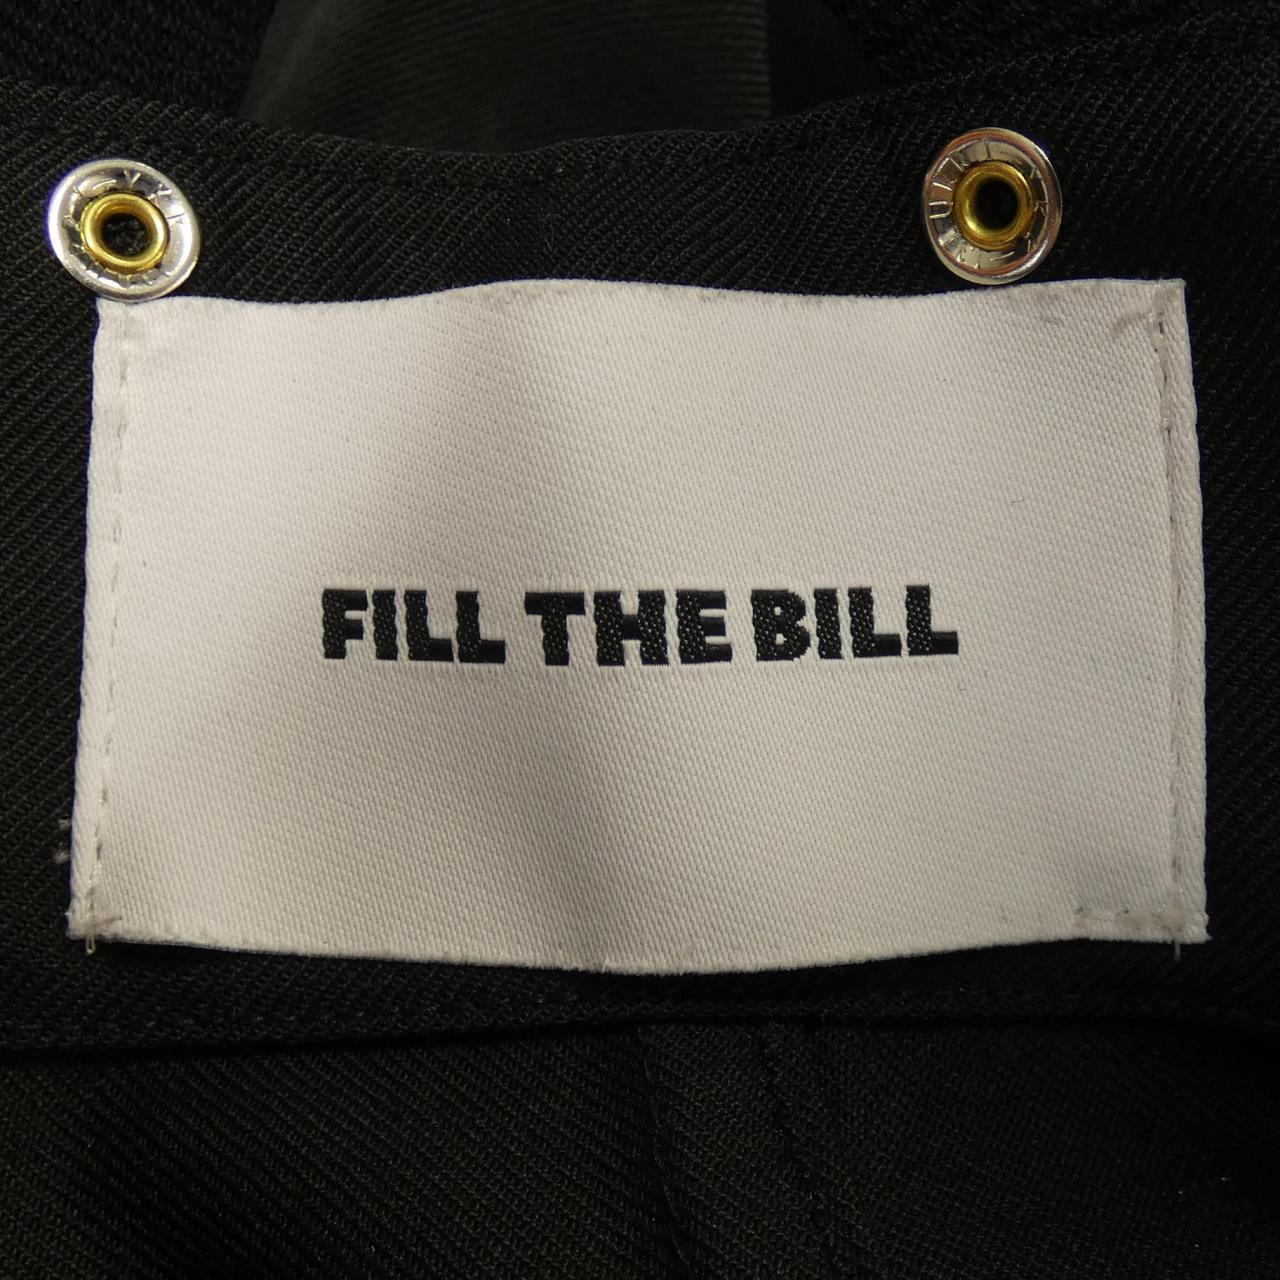 Fill the Bill All-in-one